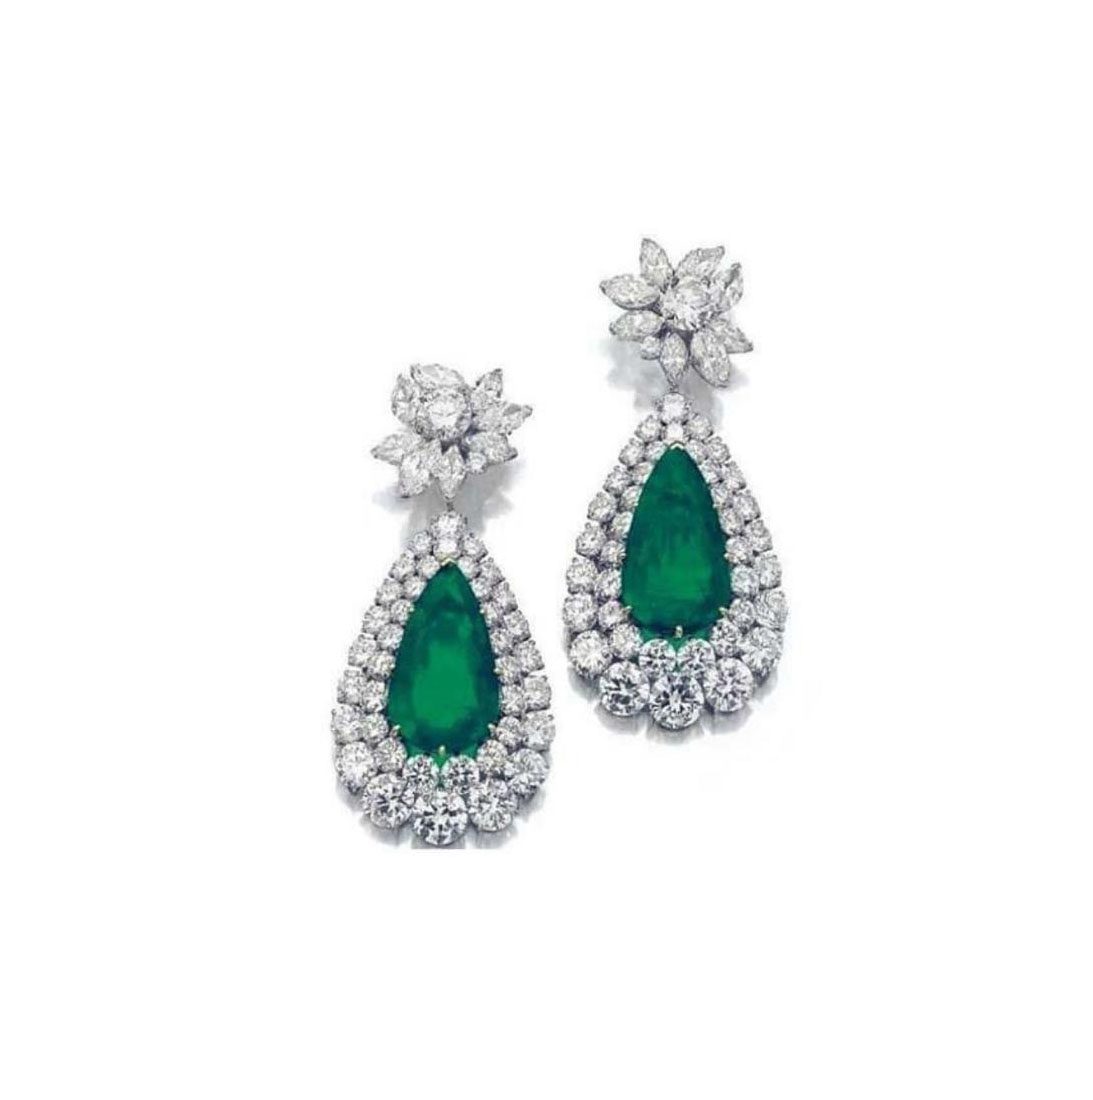 Emerald And Diamond Earrings Sold